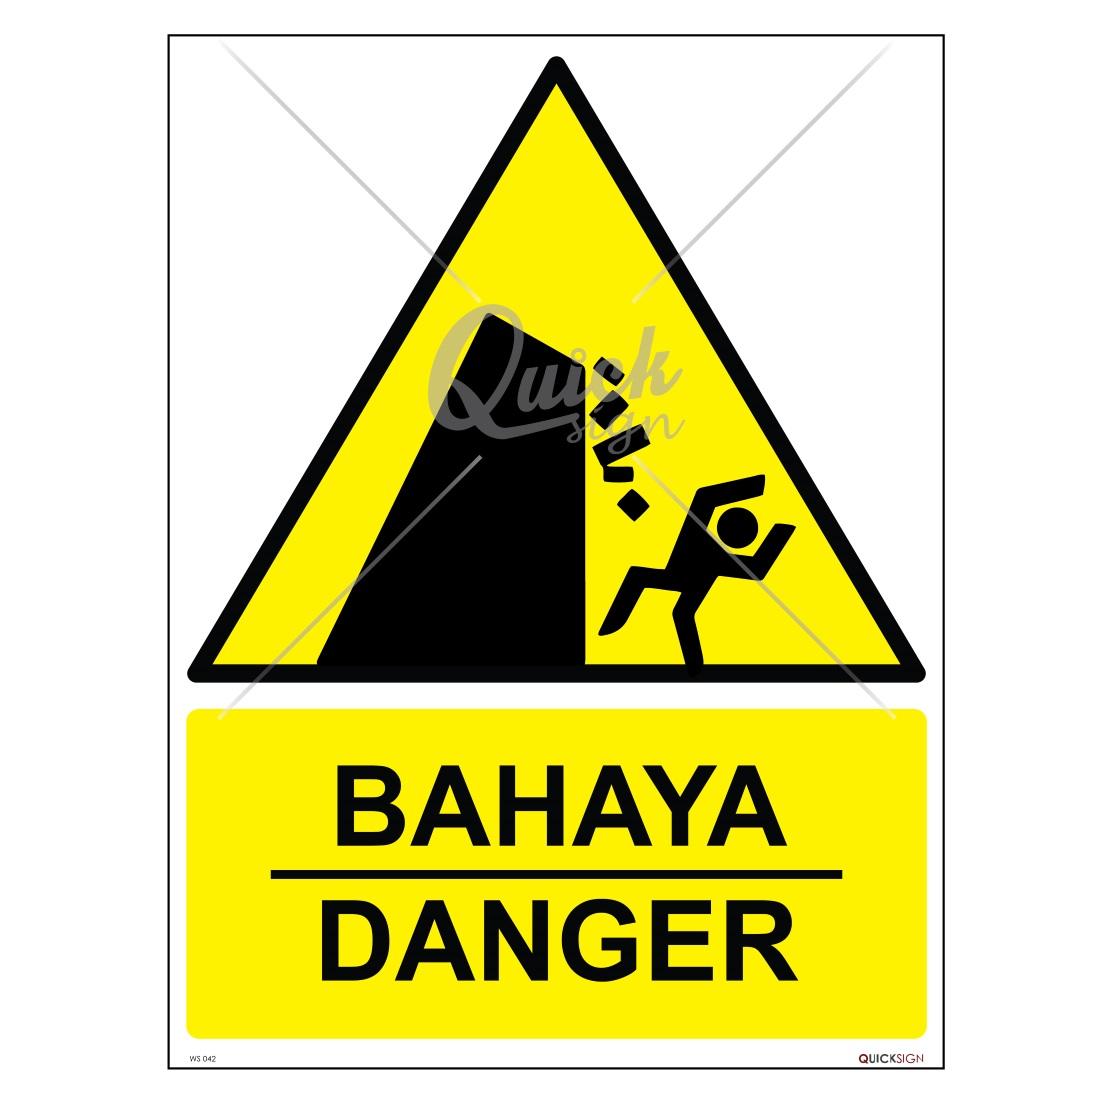 Falling For Danger Ch 15 WS042 - Danger Falling Rocks Signage - Safetyware Sdn Bhd